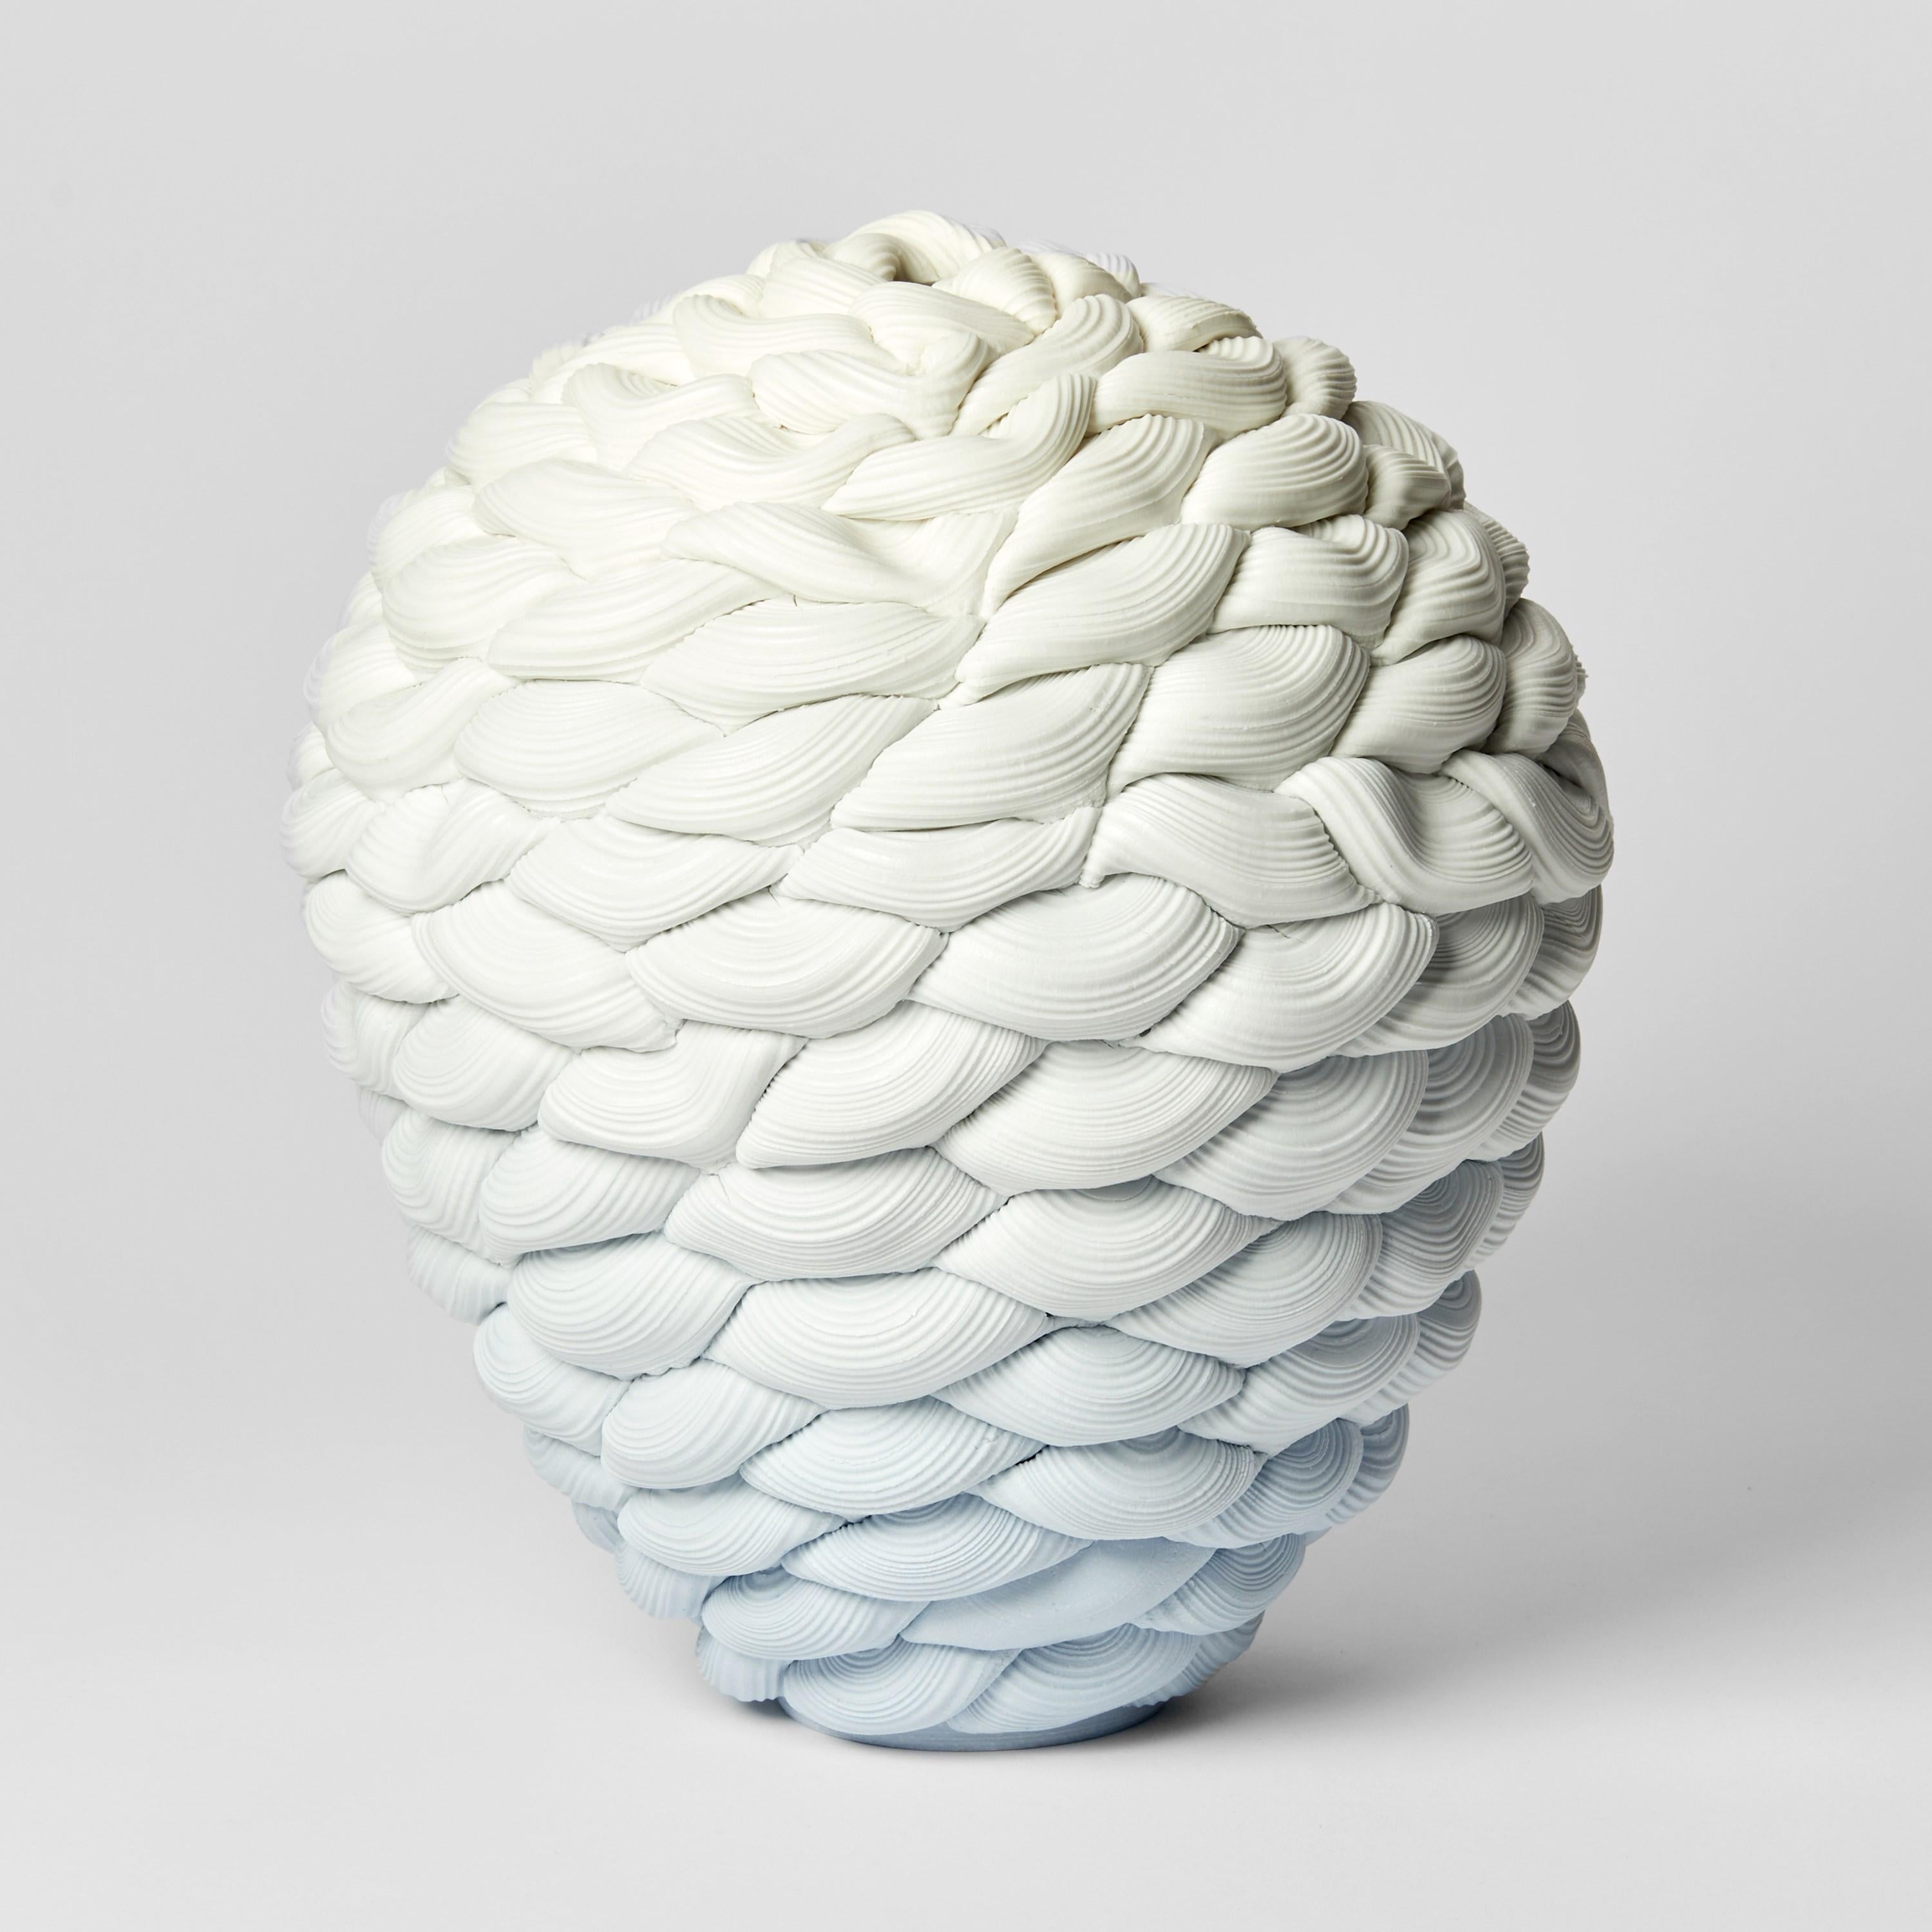 Hand-Crafted Monochromatic Fold iv, Blue & White Parian Porcelain Vessel by Steven Edwards